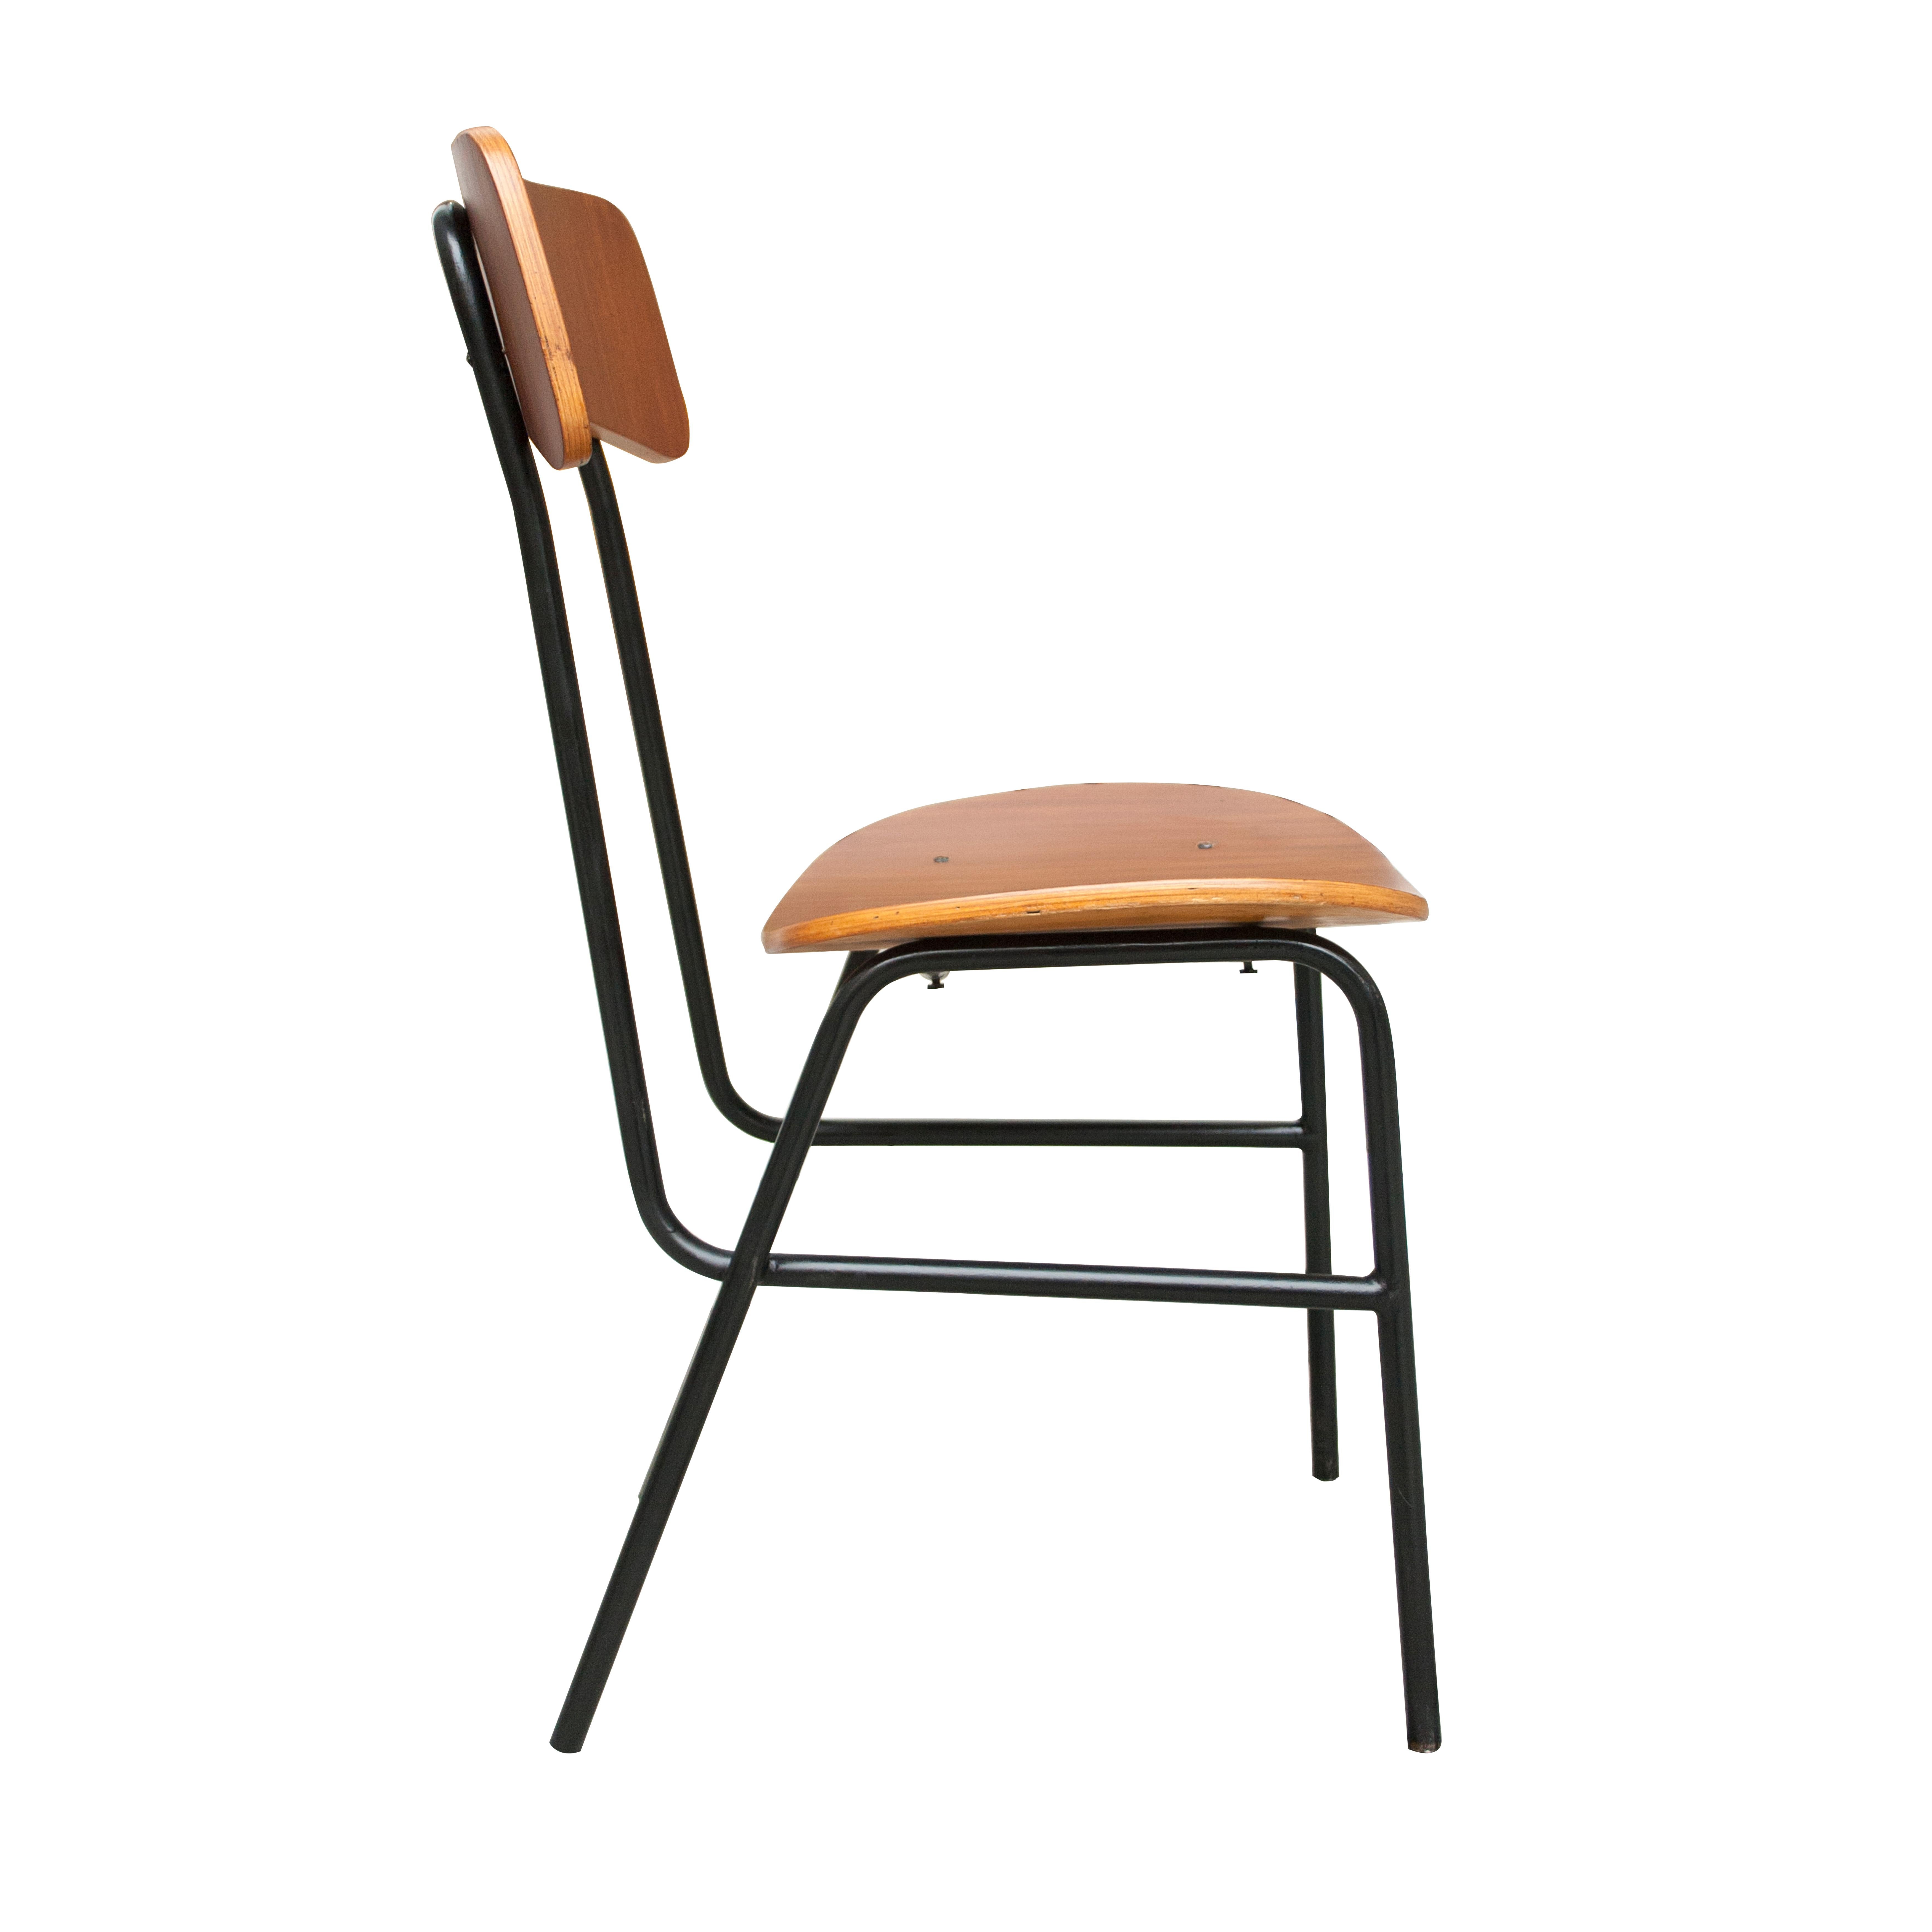 Italian Mid-Century Modern Teak Wood Chair with Metalic Structure, Italy, 1950 For Sale